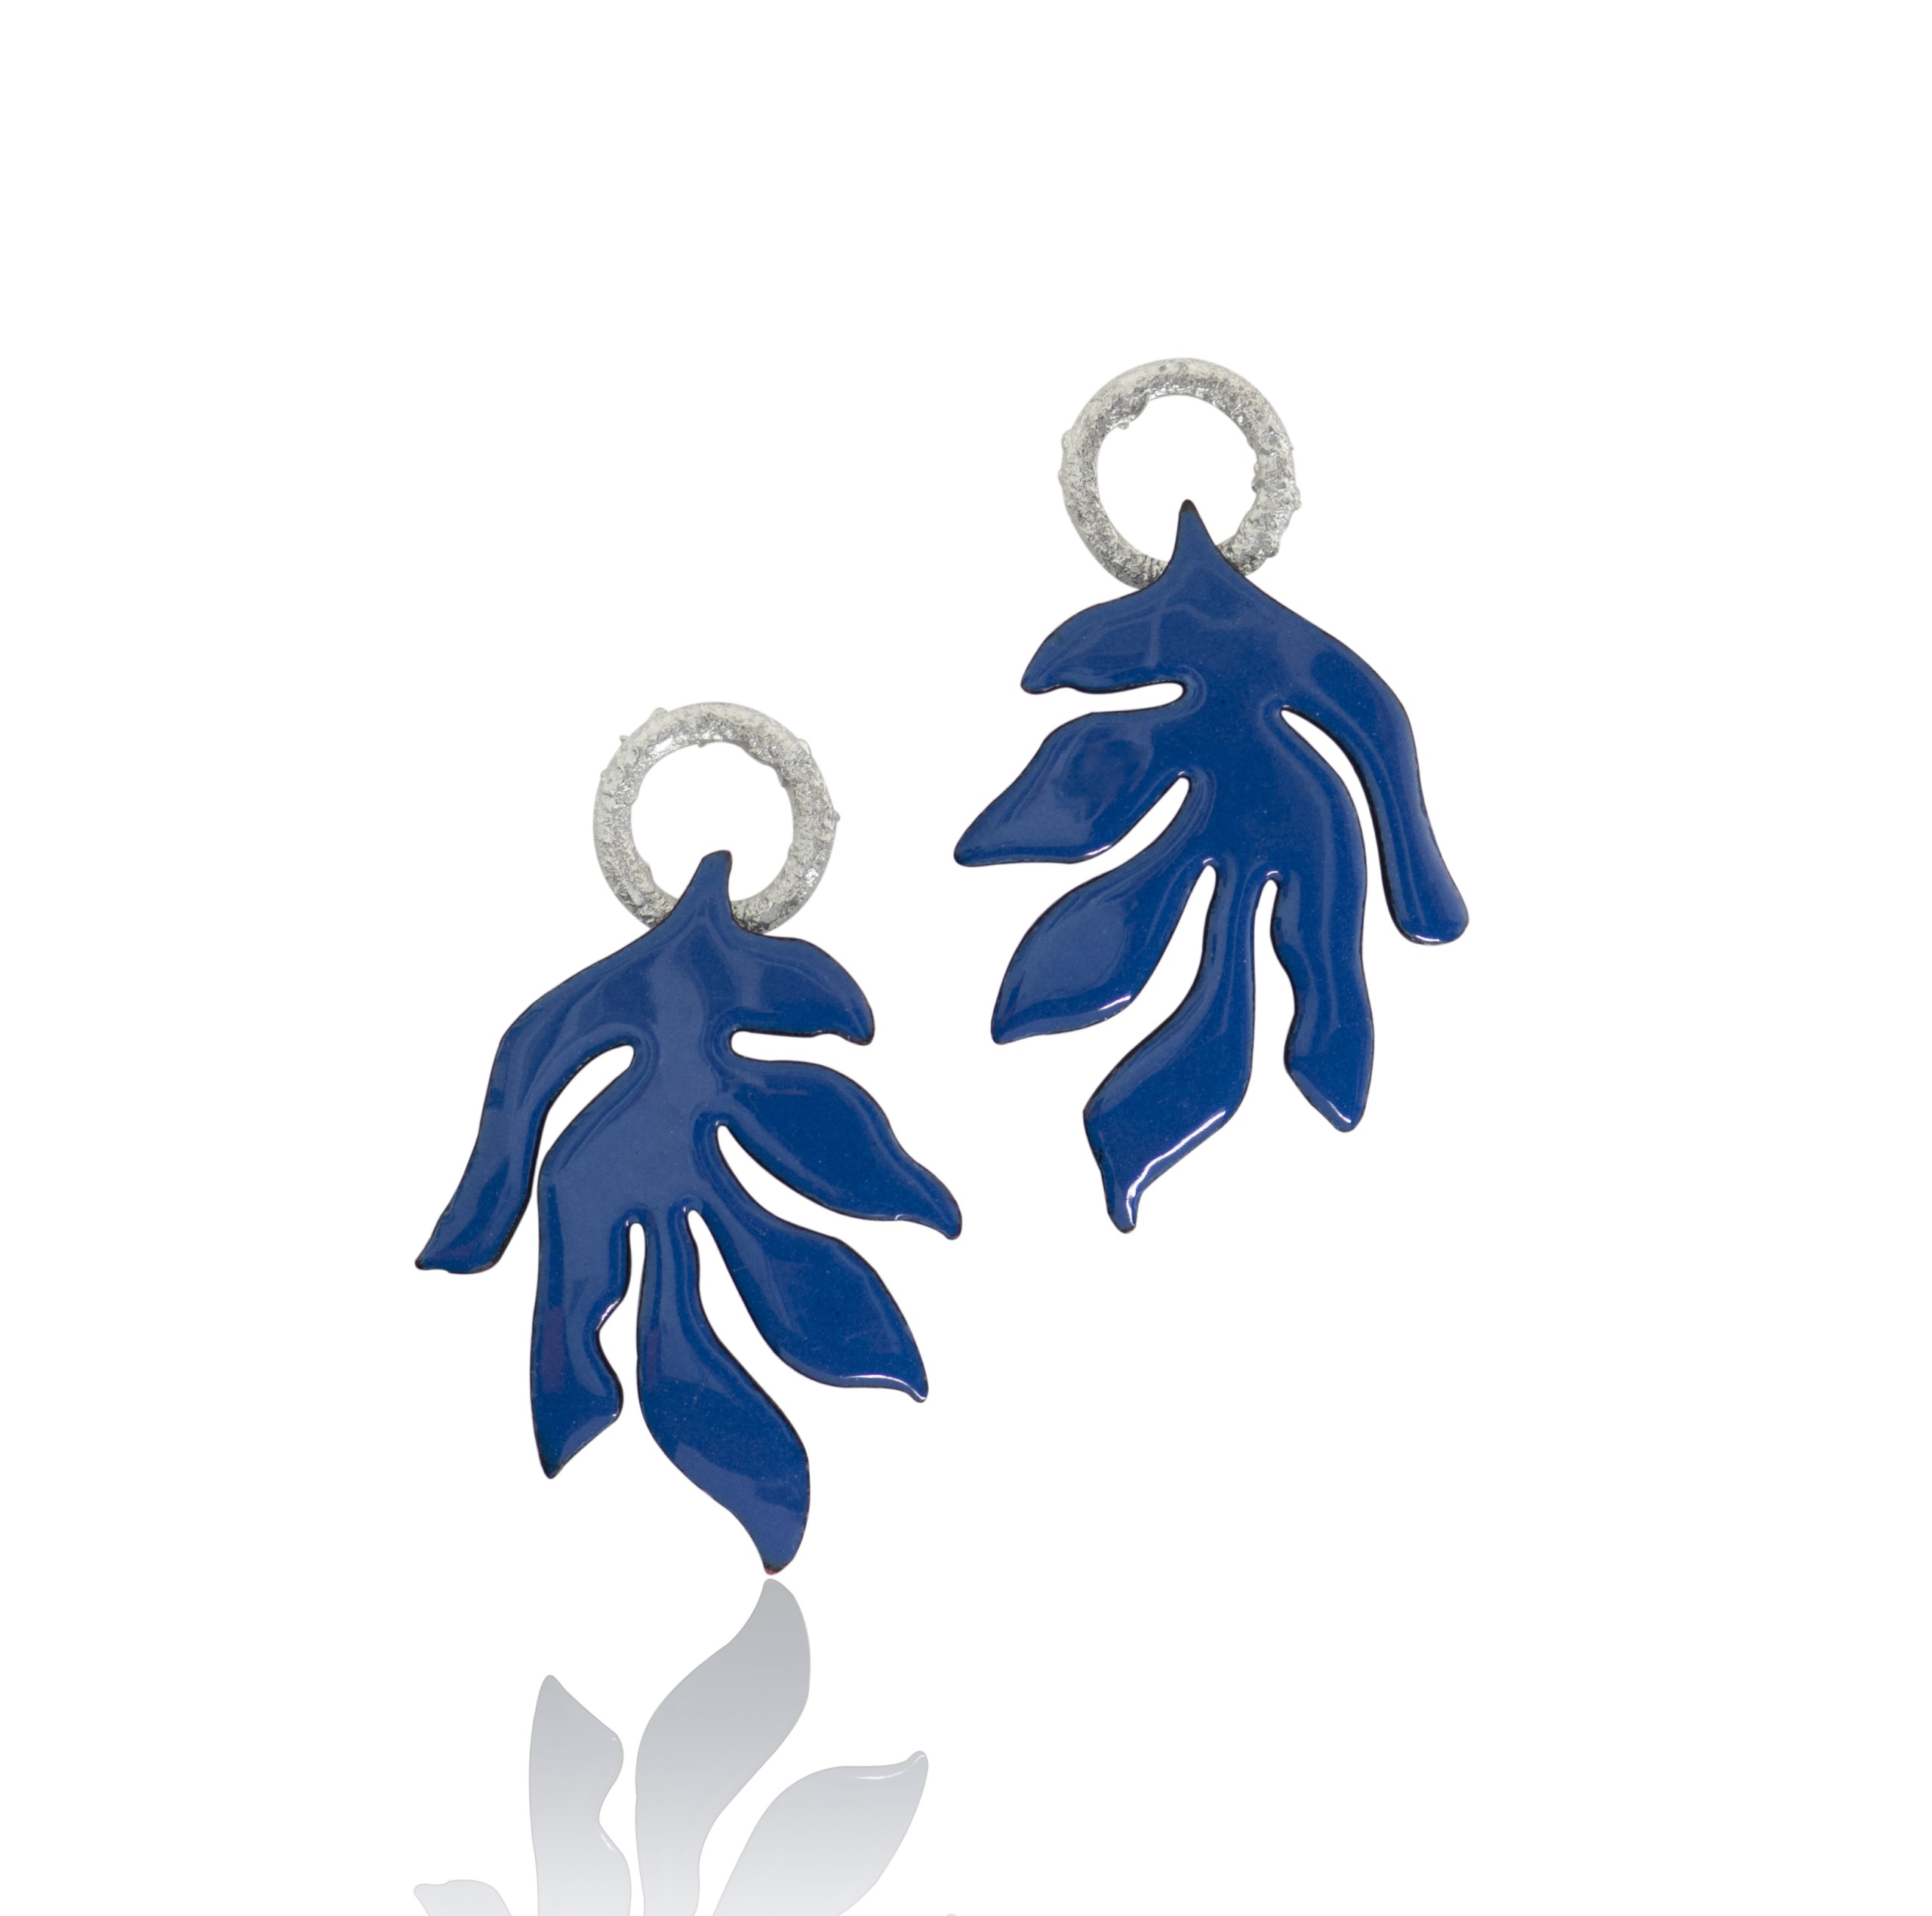 Joanna Nealey, “Leaf Earrings”, Harvest Blue and bright Silver